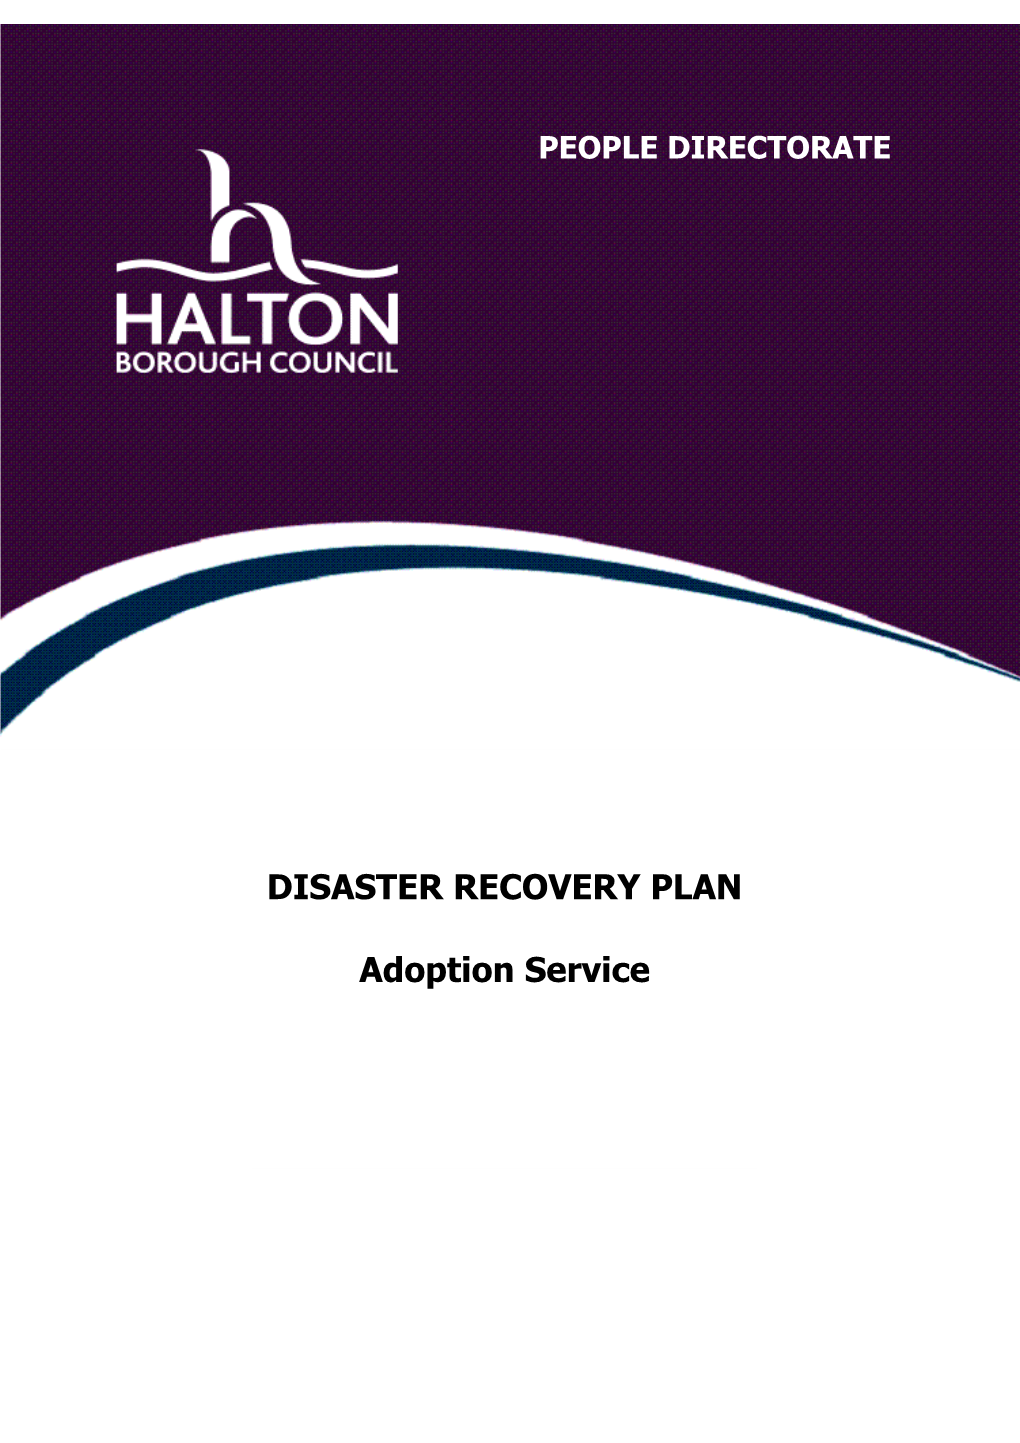 This Plan Should Be Read in Conjunction with the People Directorate Business Continuity